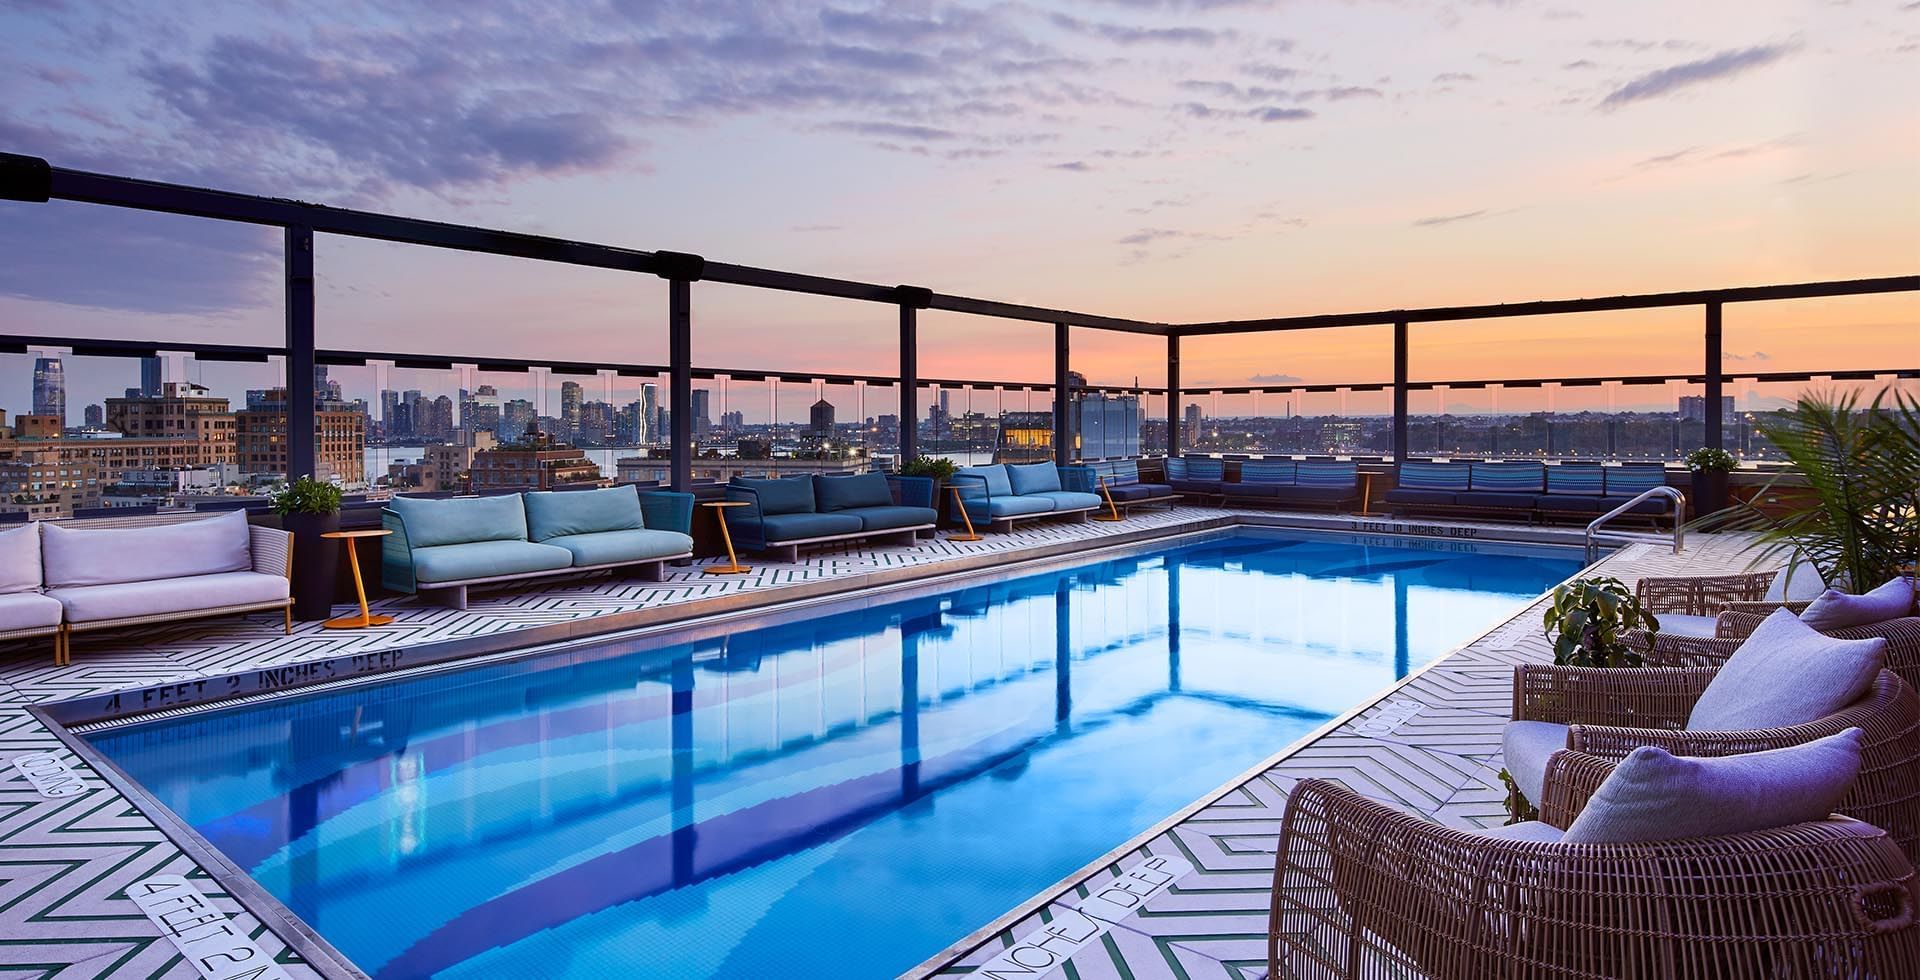 Rooftop pool at sunset with lounge chairs